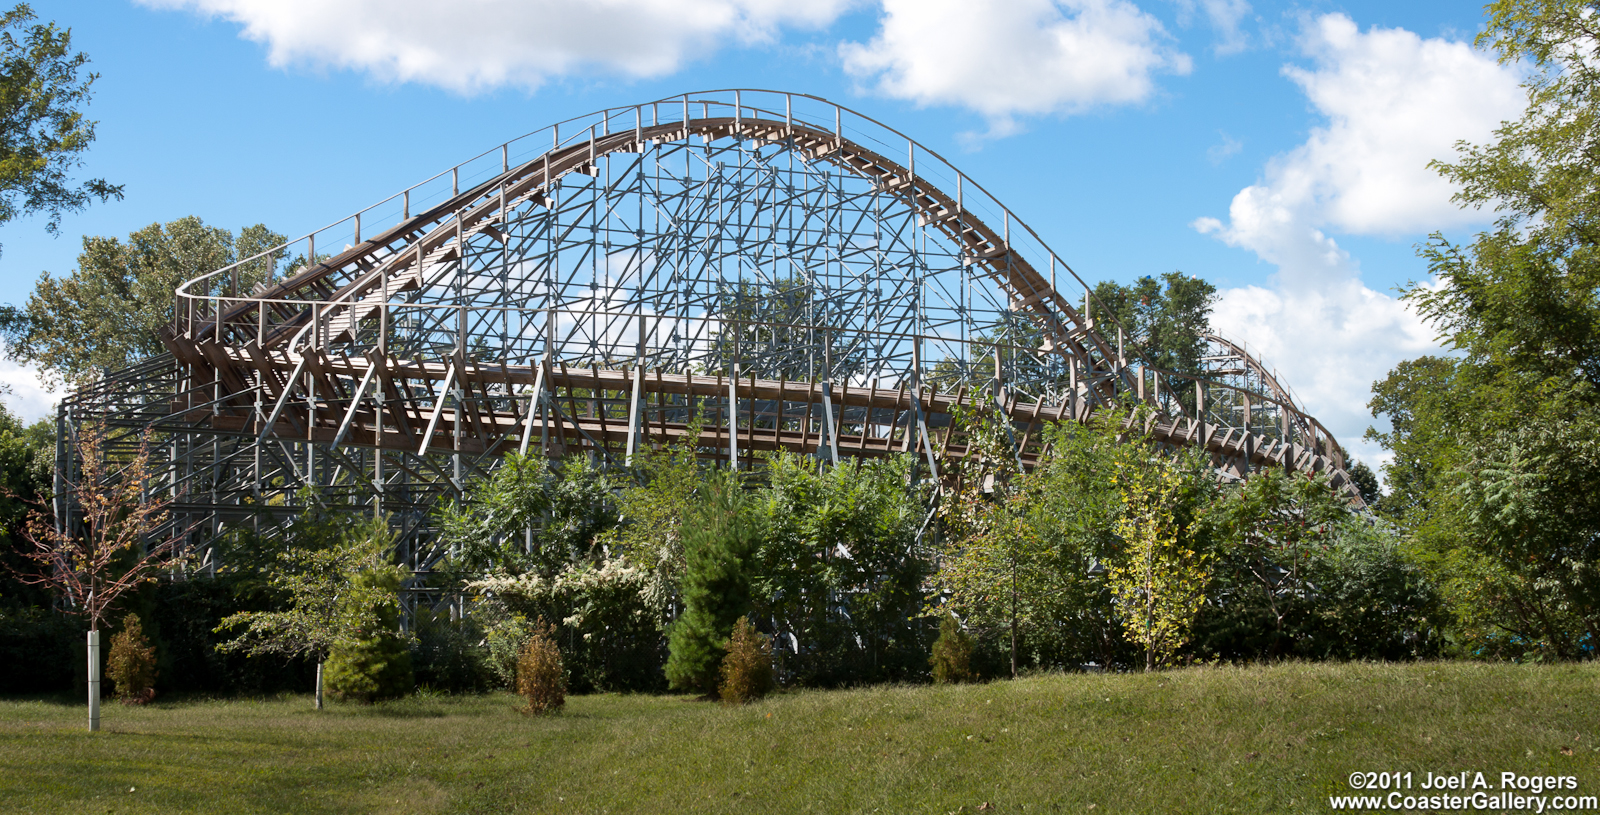 Ravine Flyer 2 - Wooden coaster with steel supports